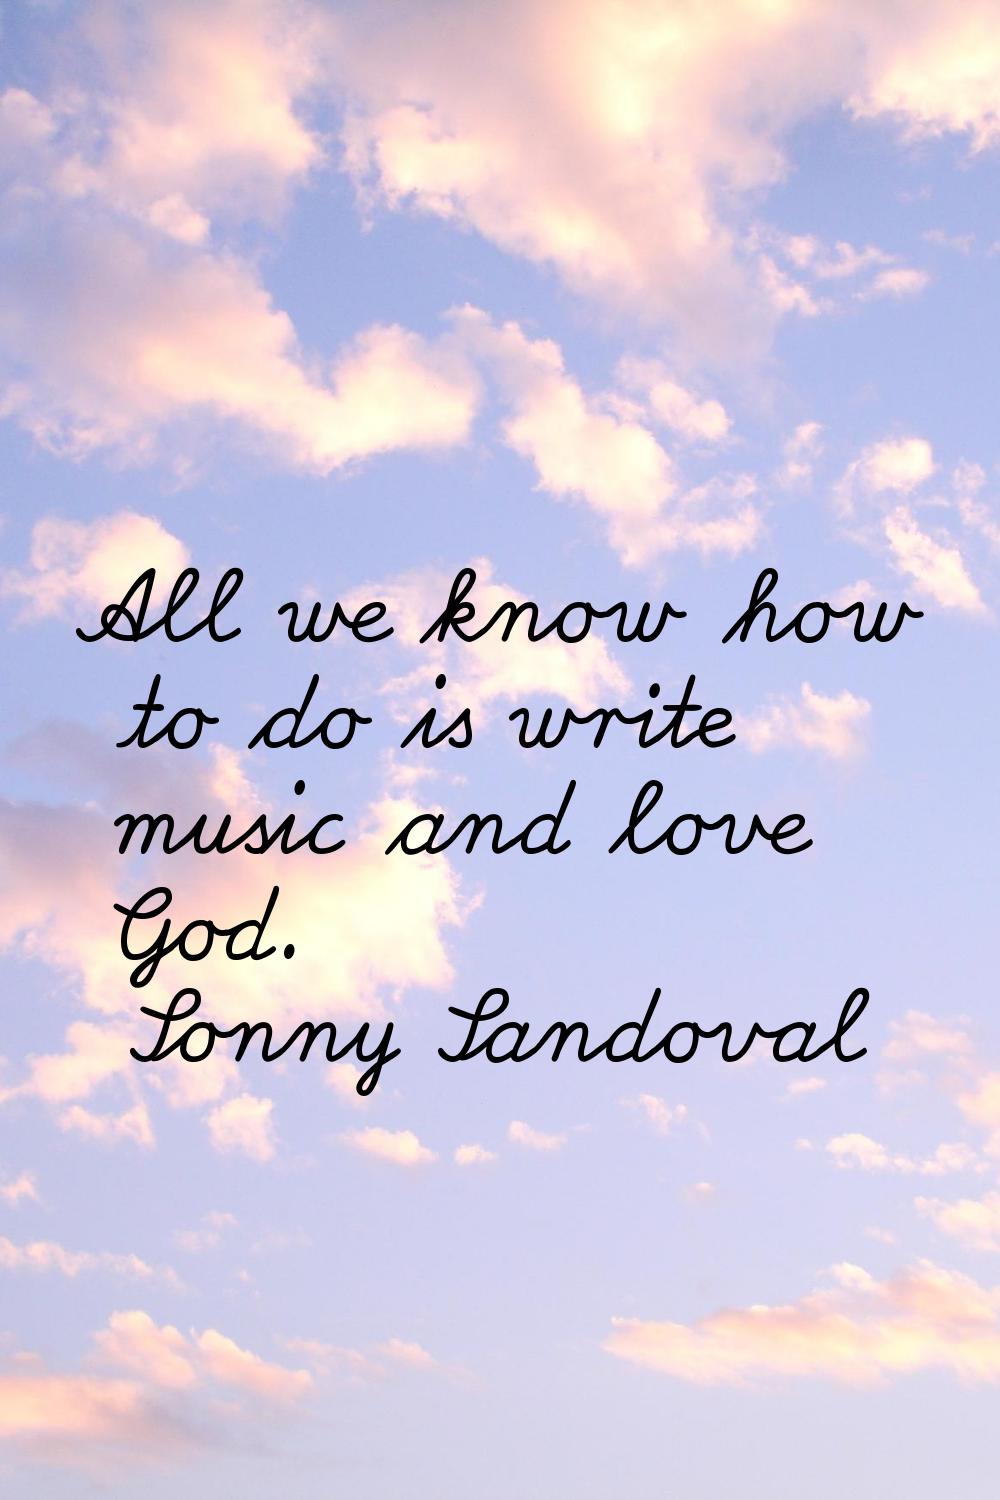 All we know how to do is write music and love God.